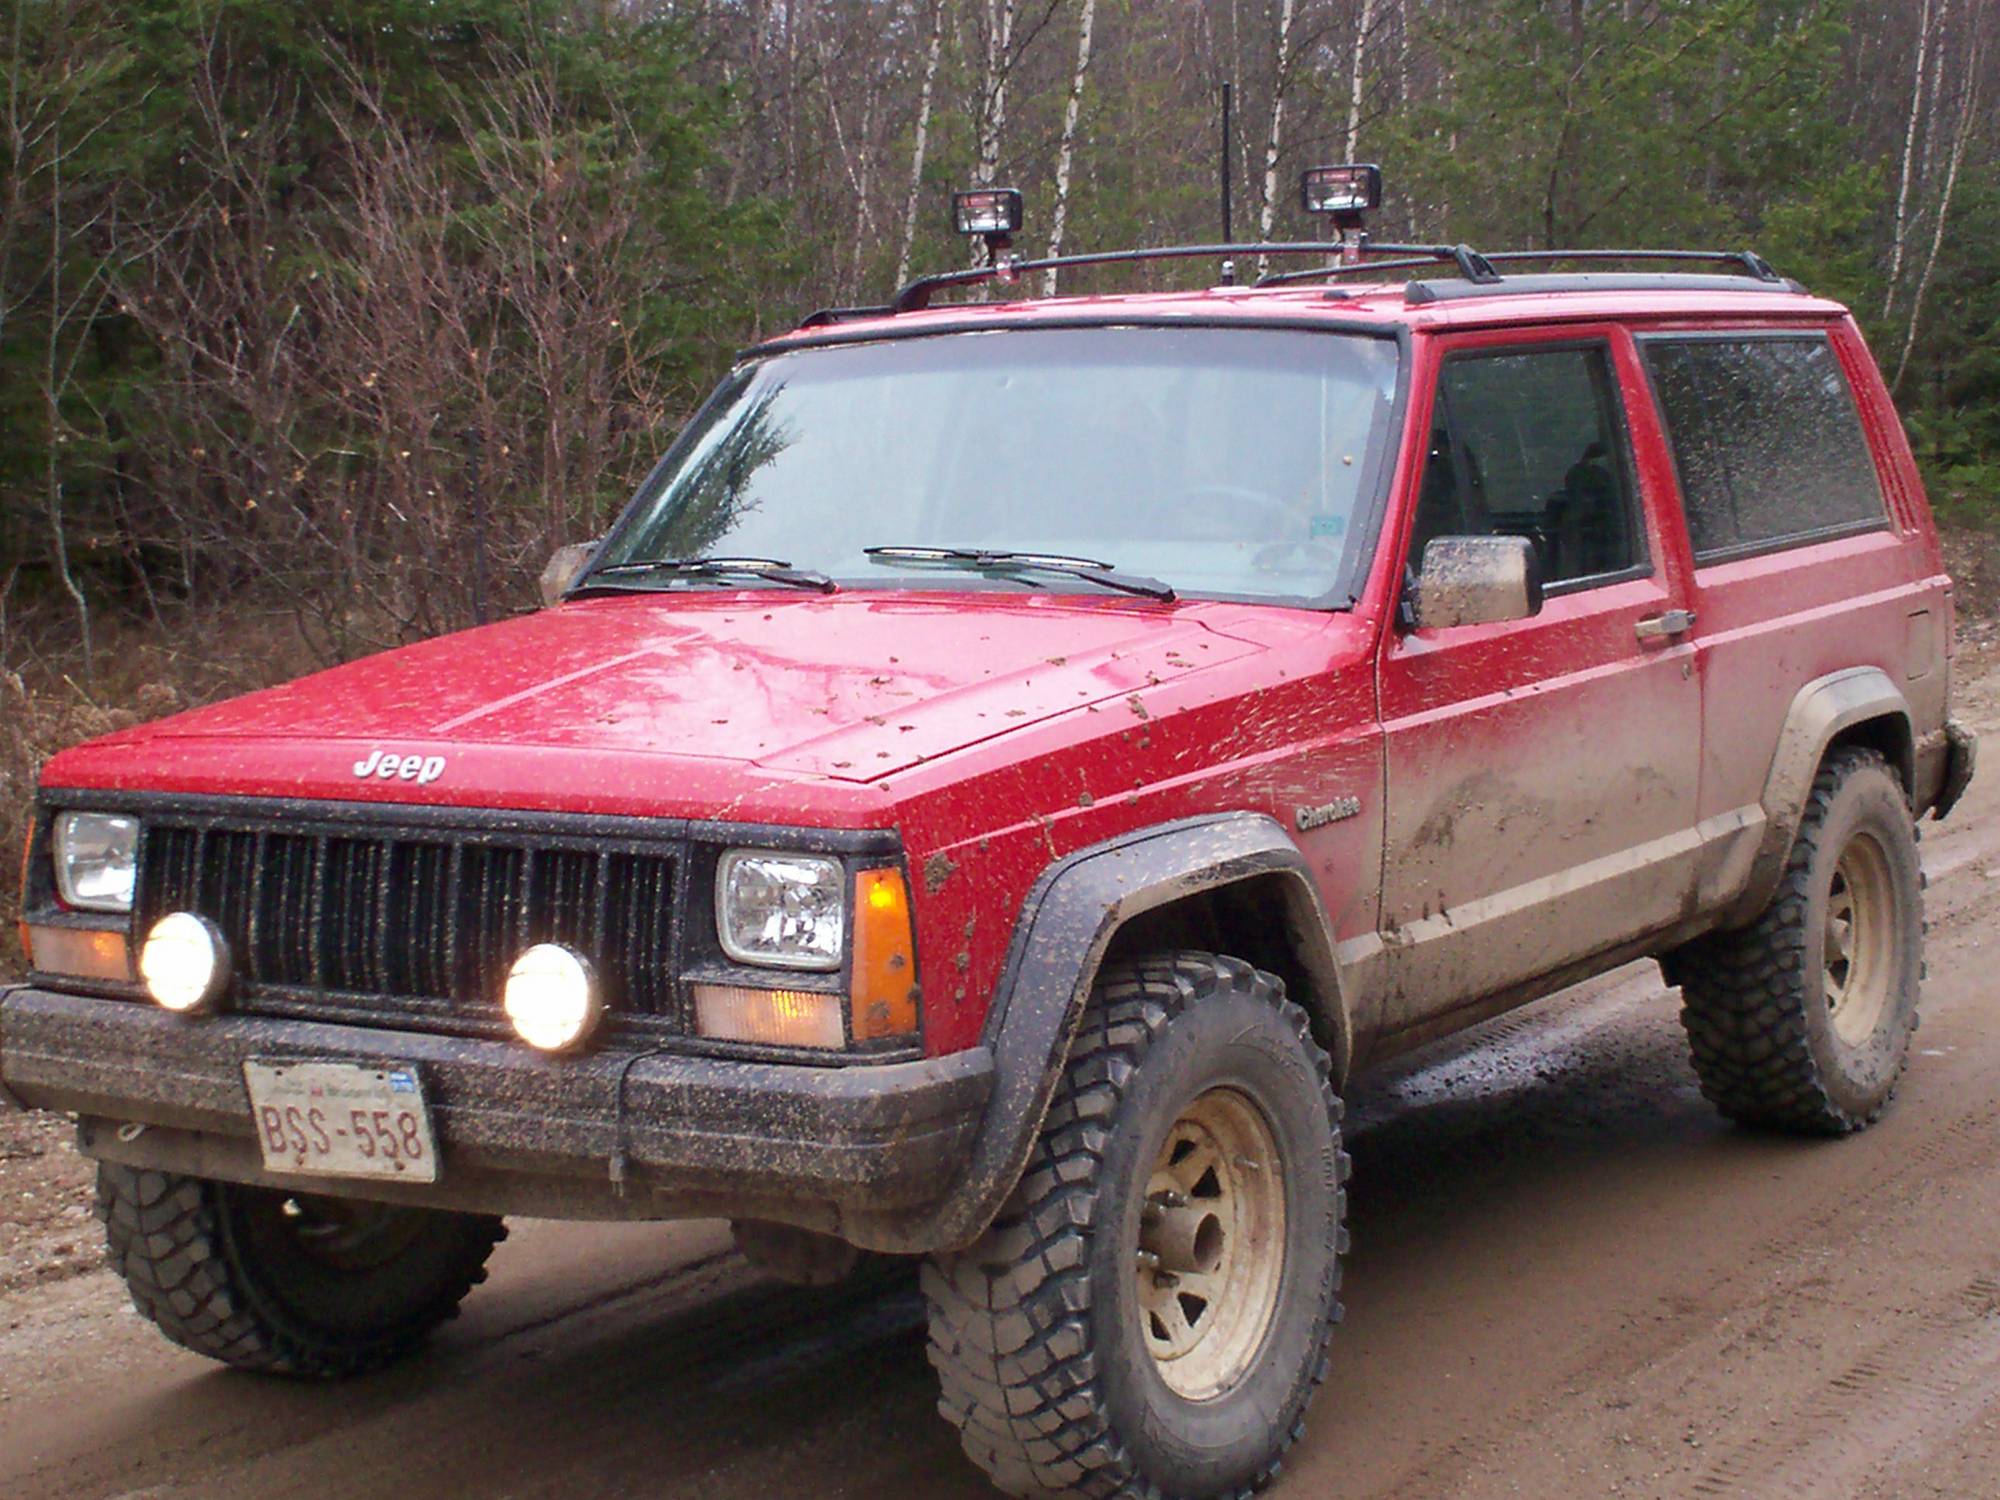 Bill_s_Cherokee_With_The_New_Tires_And_Wheels